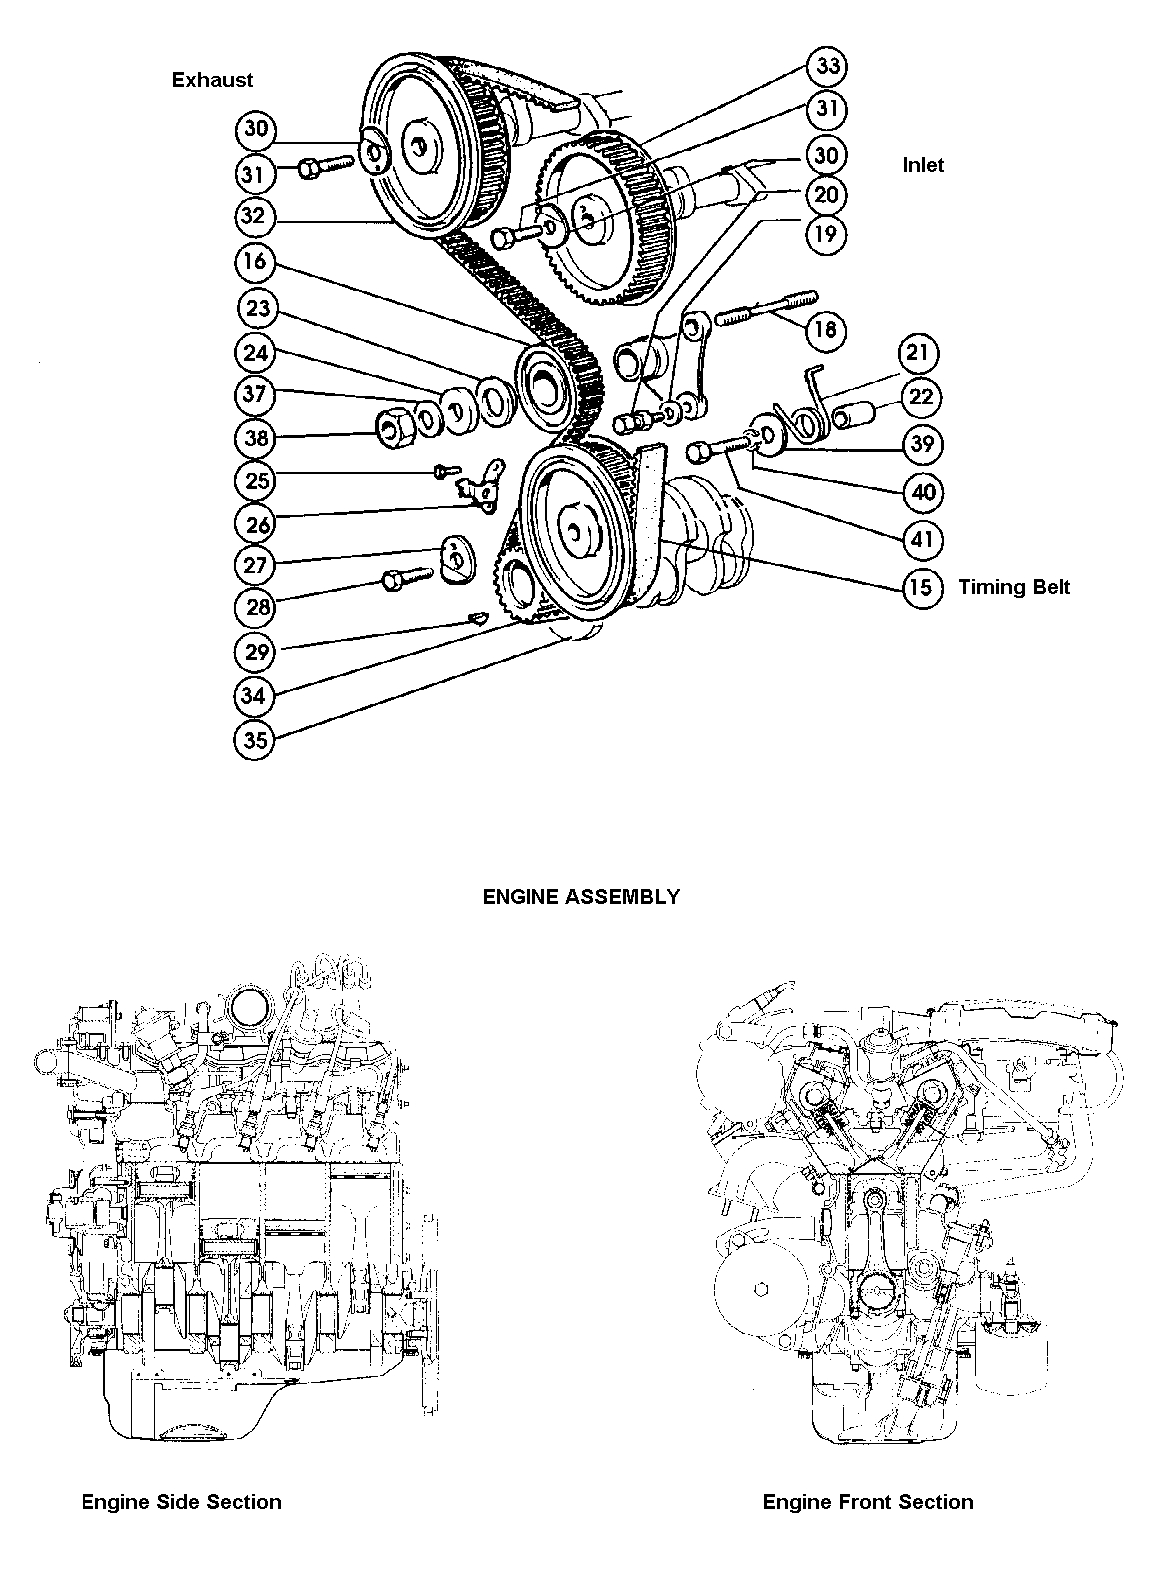 Timing Gear & Engine Assembly